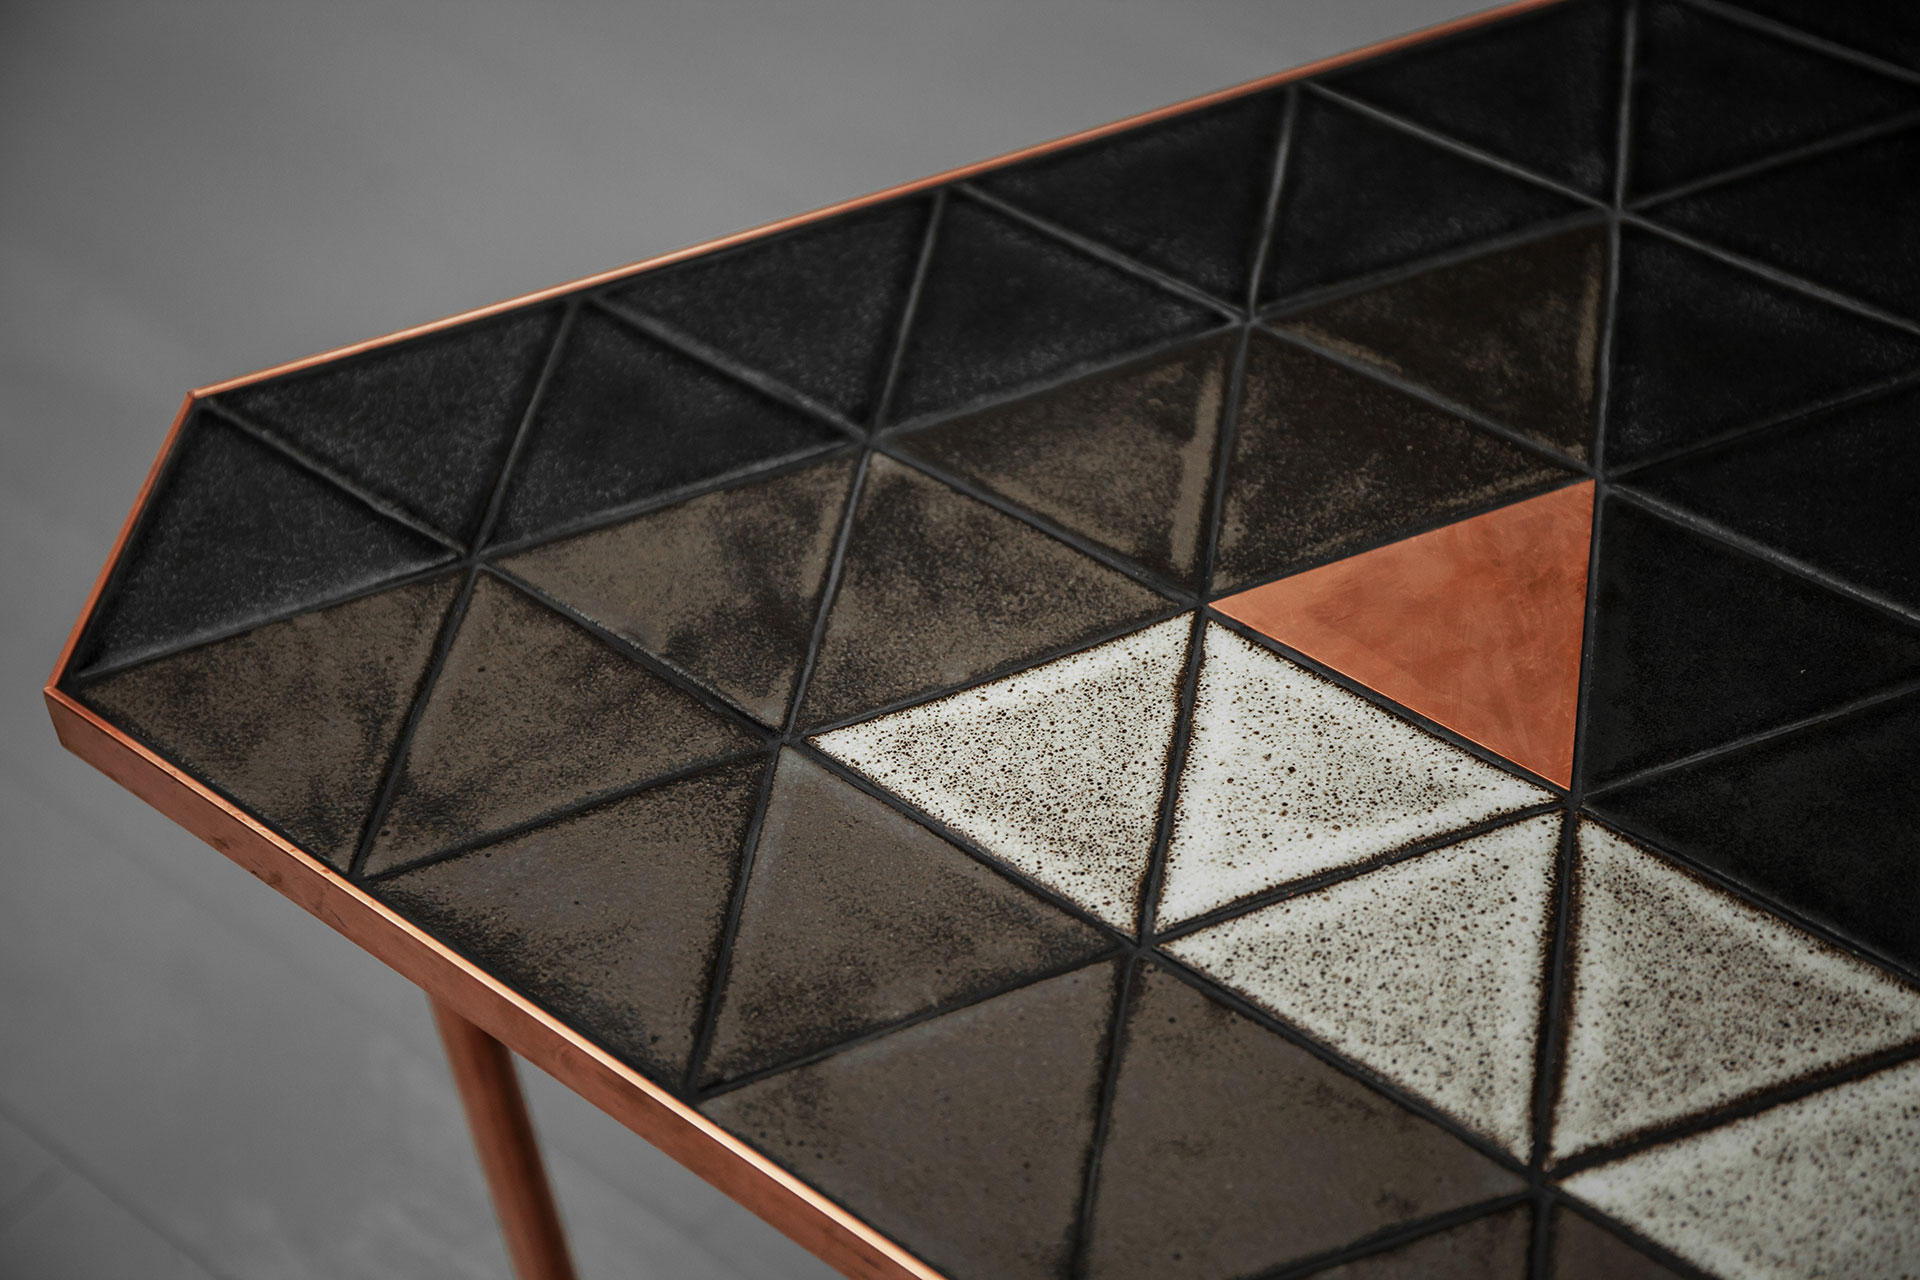 Handmade ceramic tiles top and copper triangle